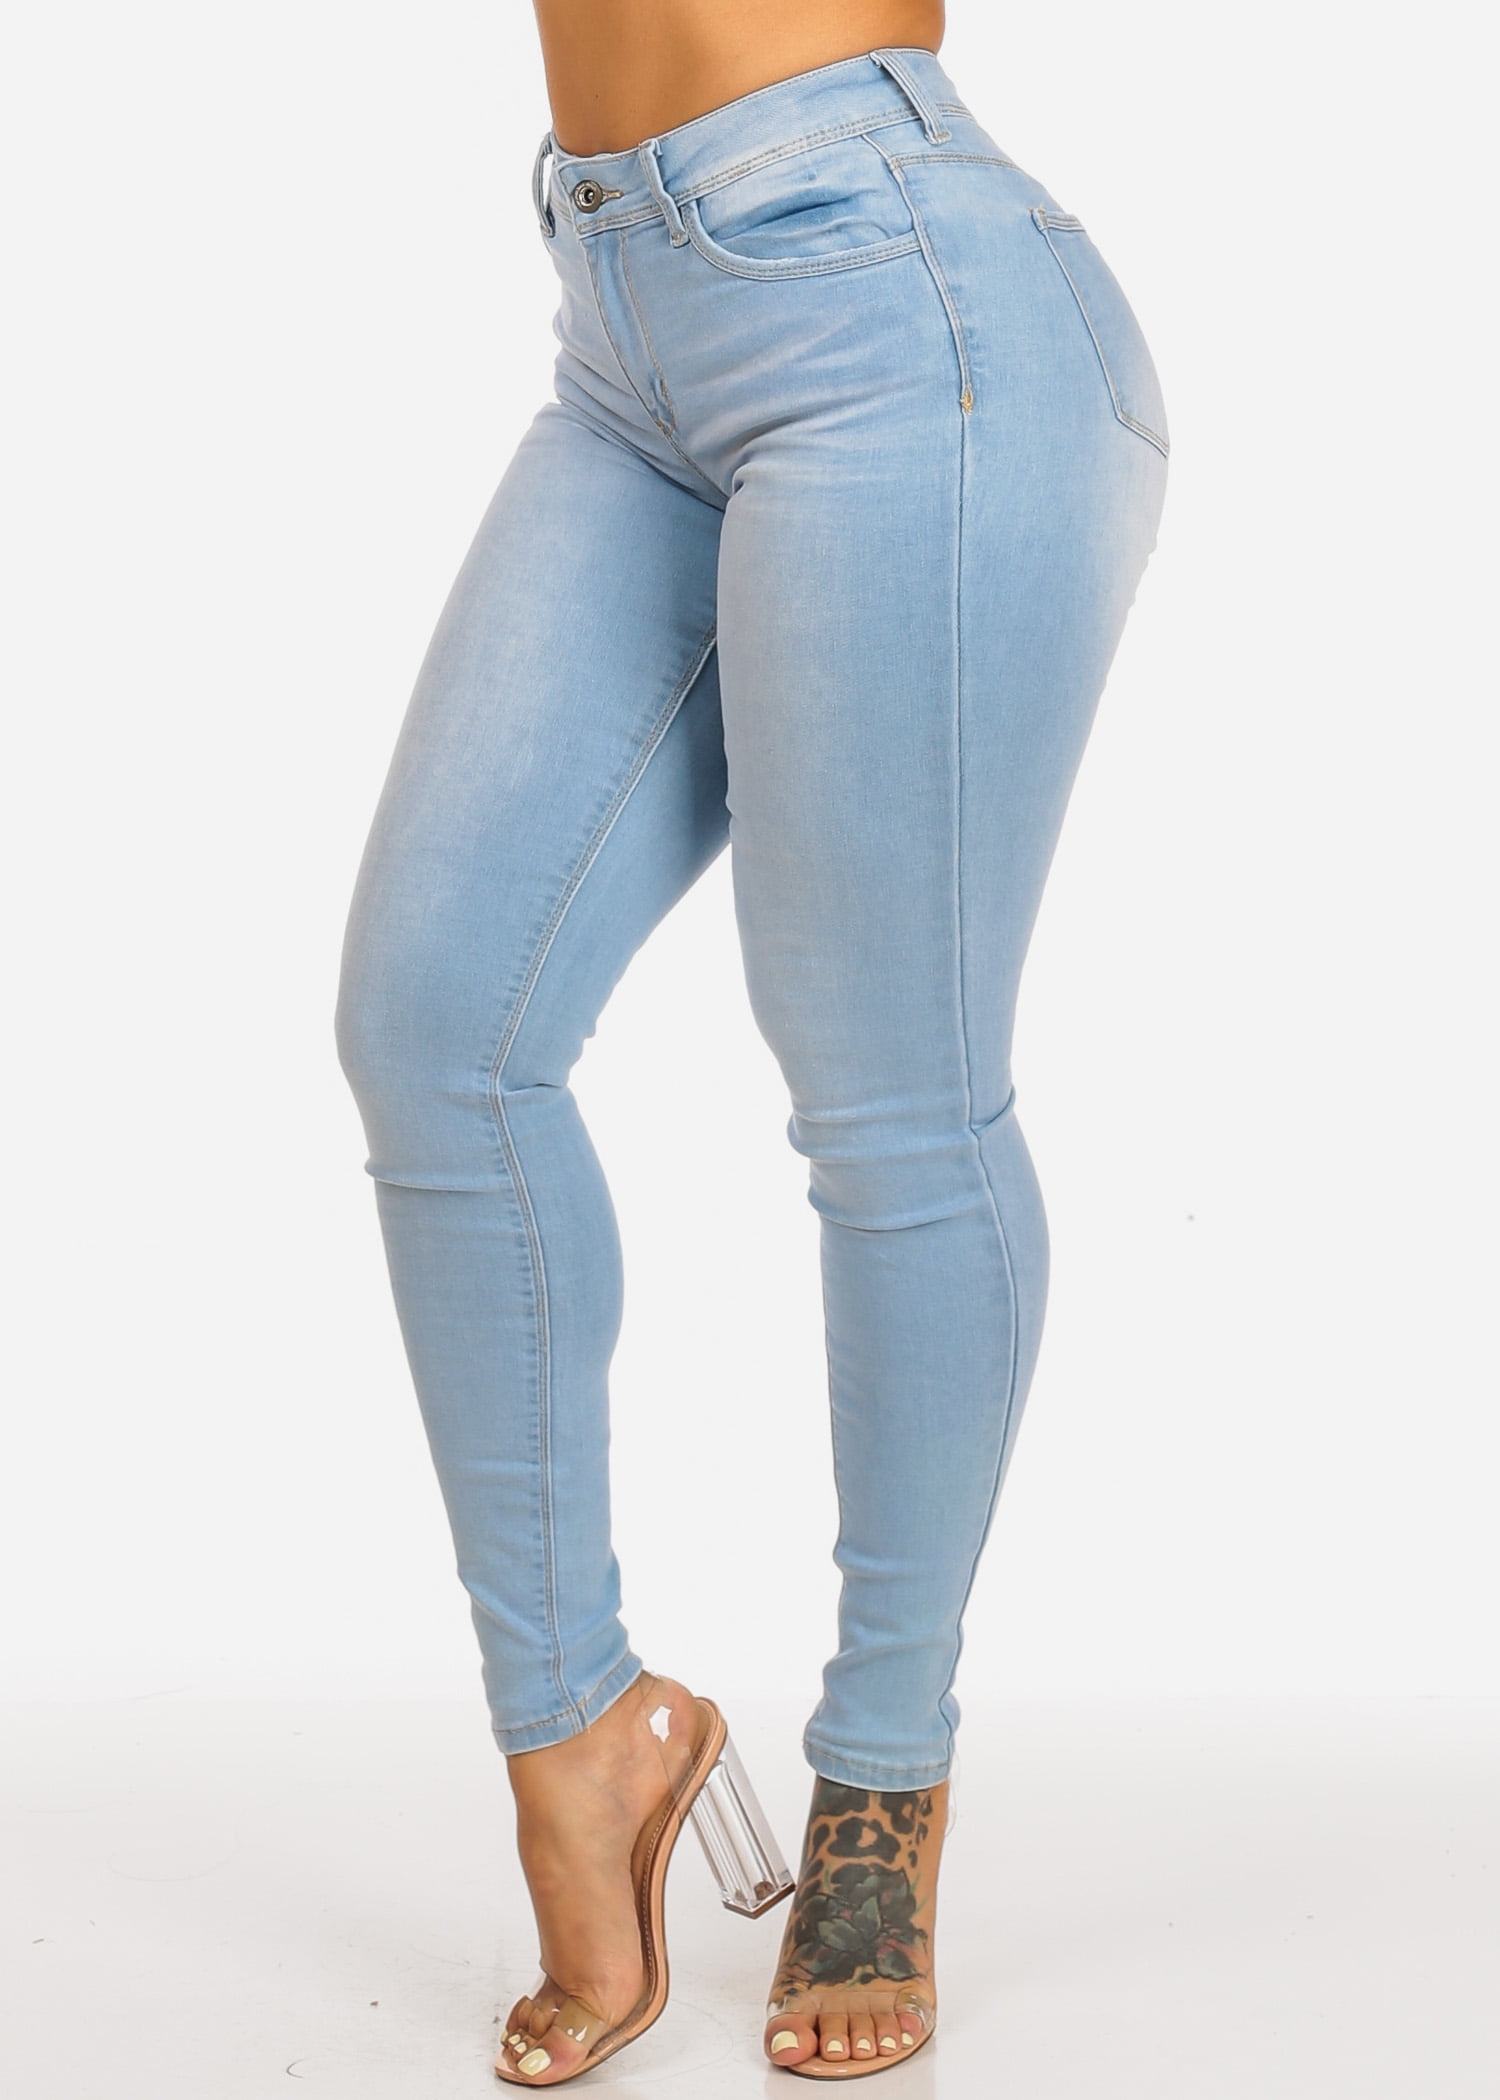 light colored jeans womens